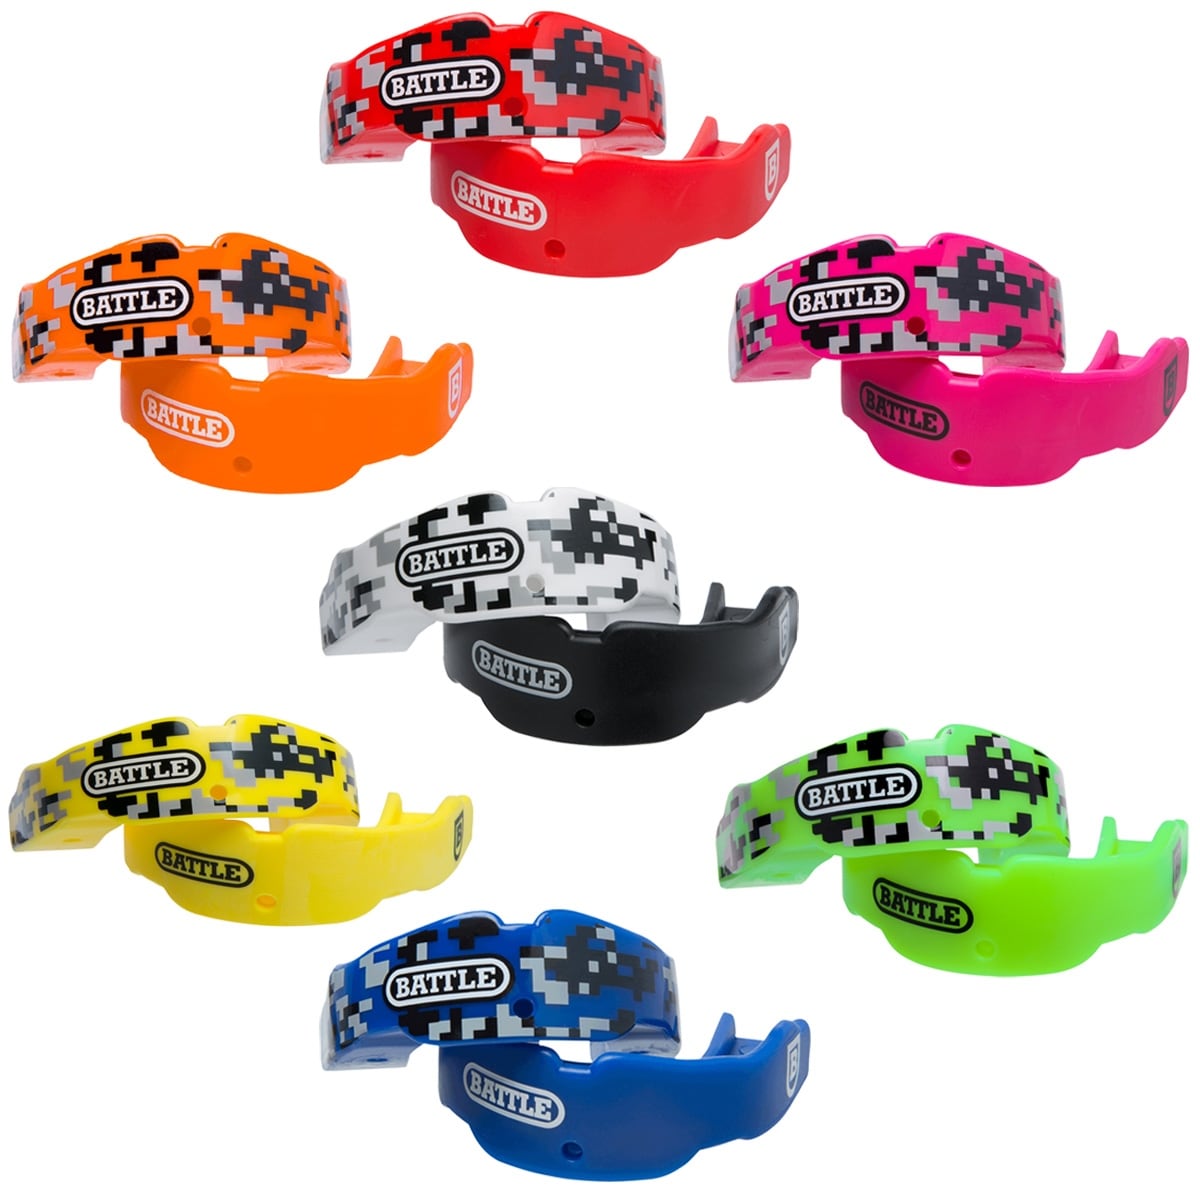 Battle Sports Mouthguard Mouth Piece 2-Pack